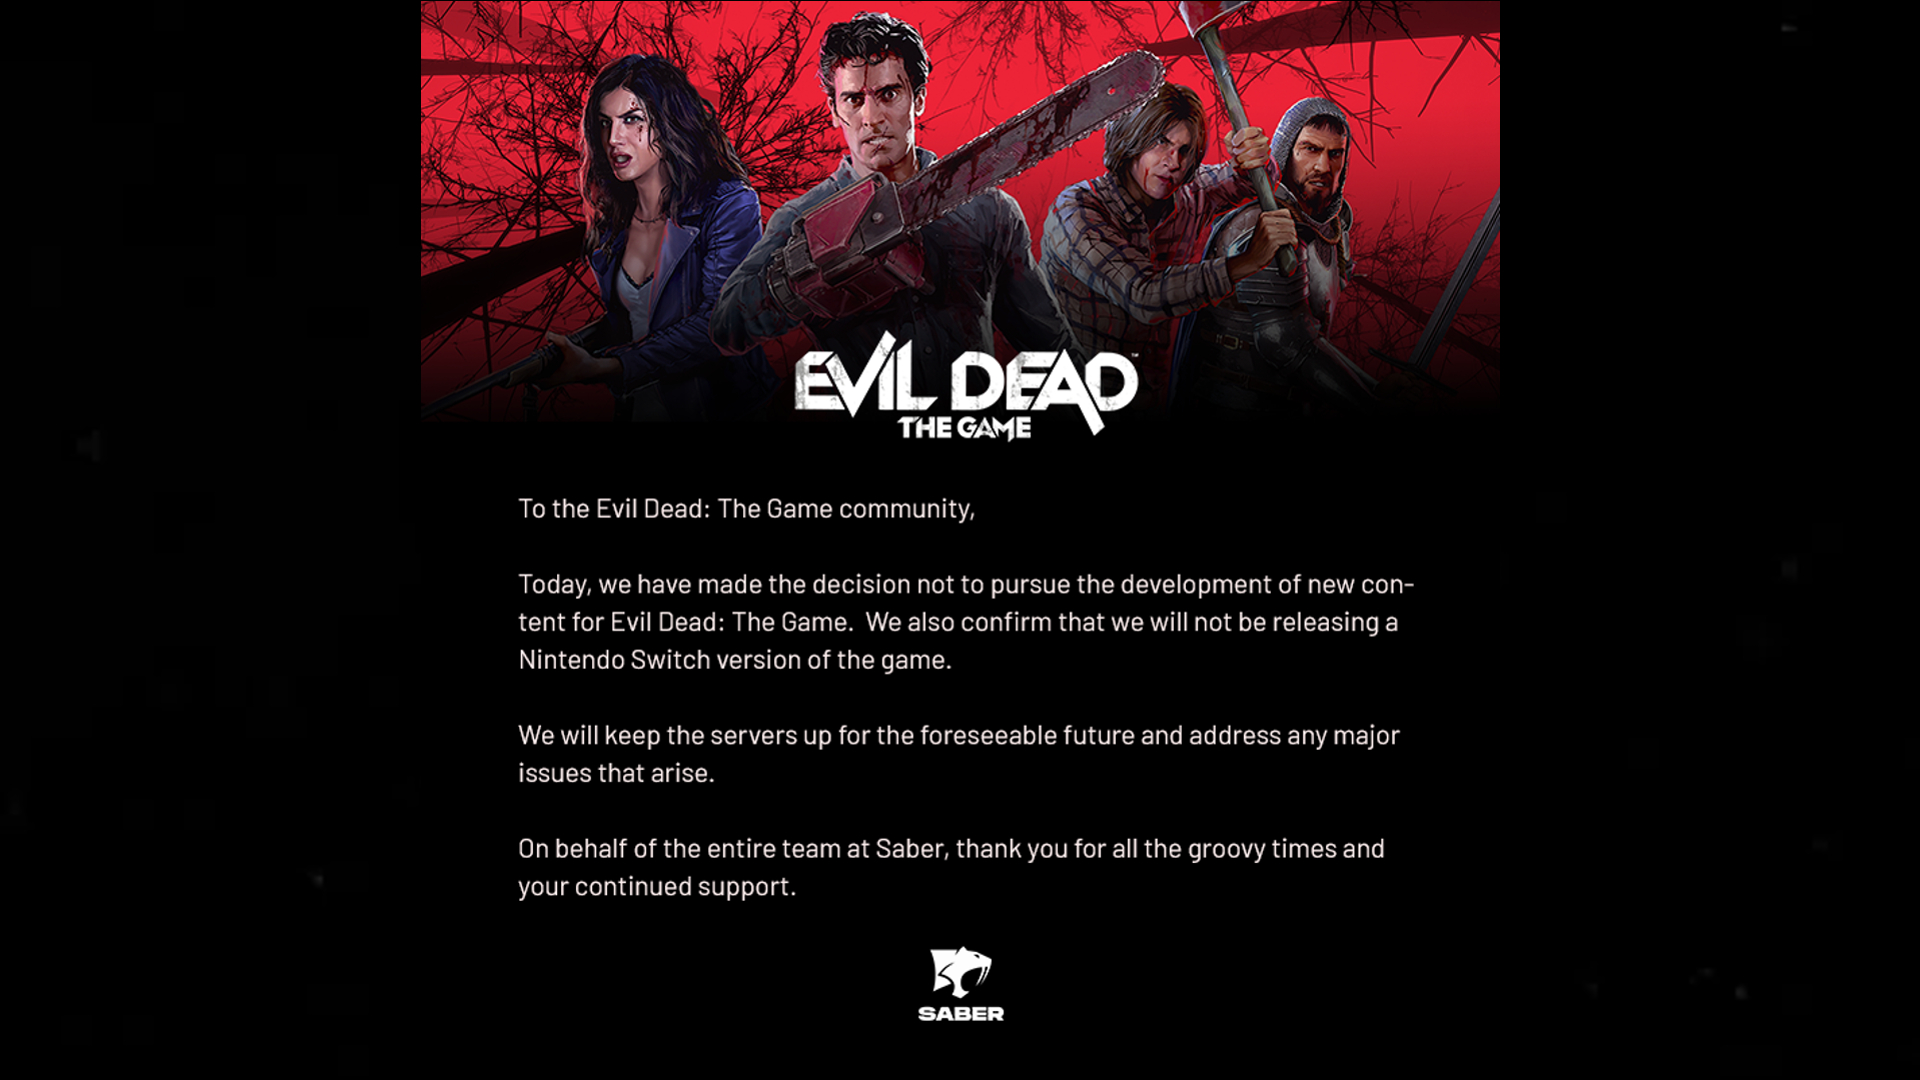 Evil Dead post from Saber Interactive about the cancellation of new content